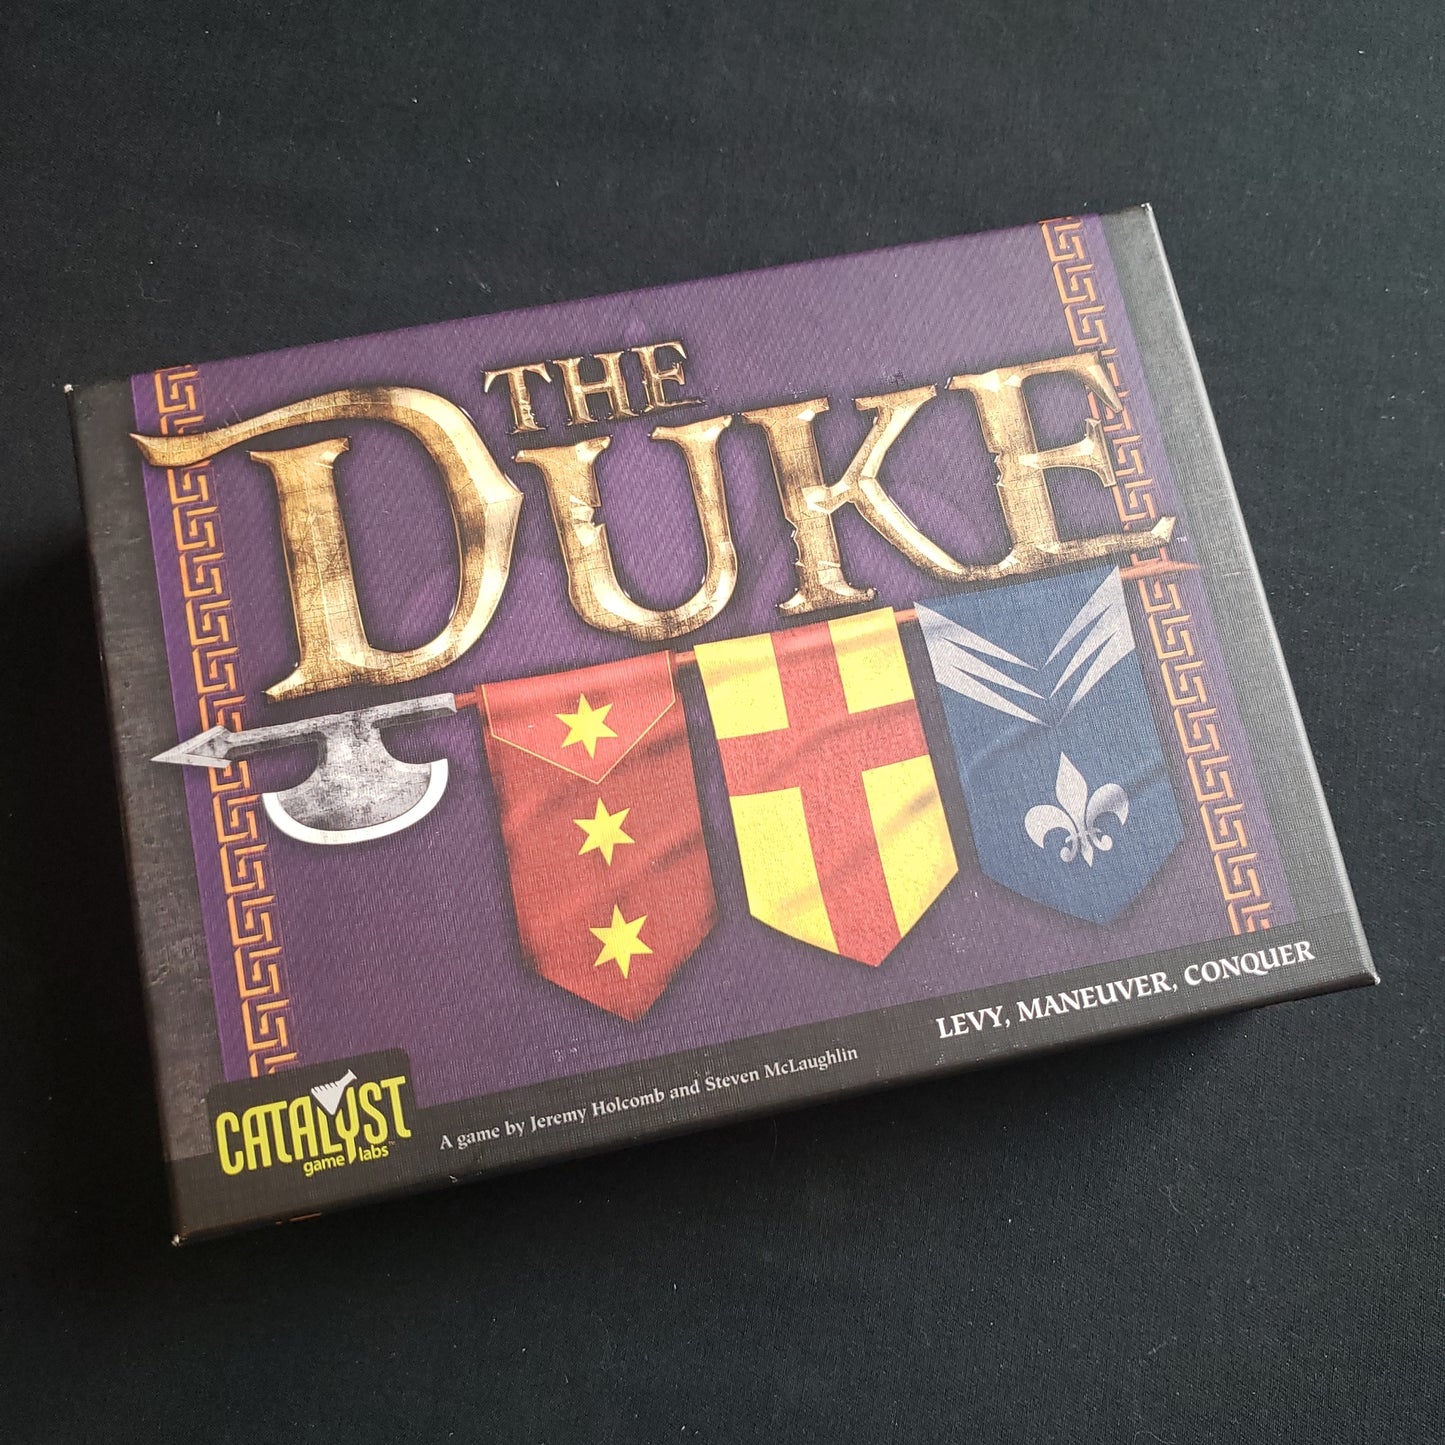 Image shows the front cover of the box of the Duke board game